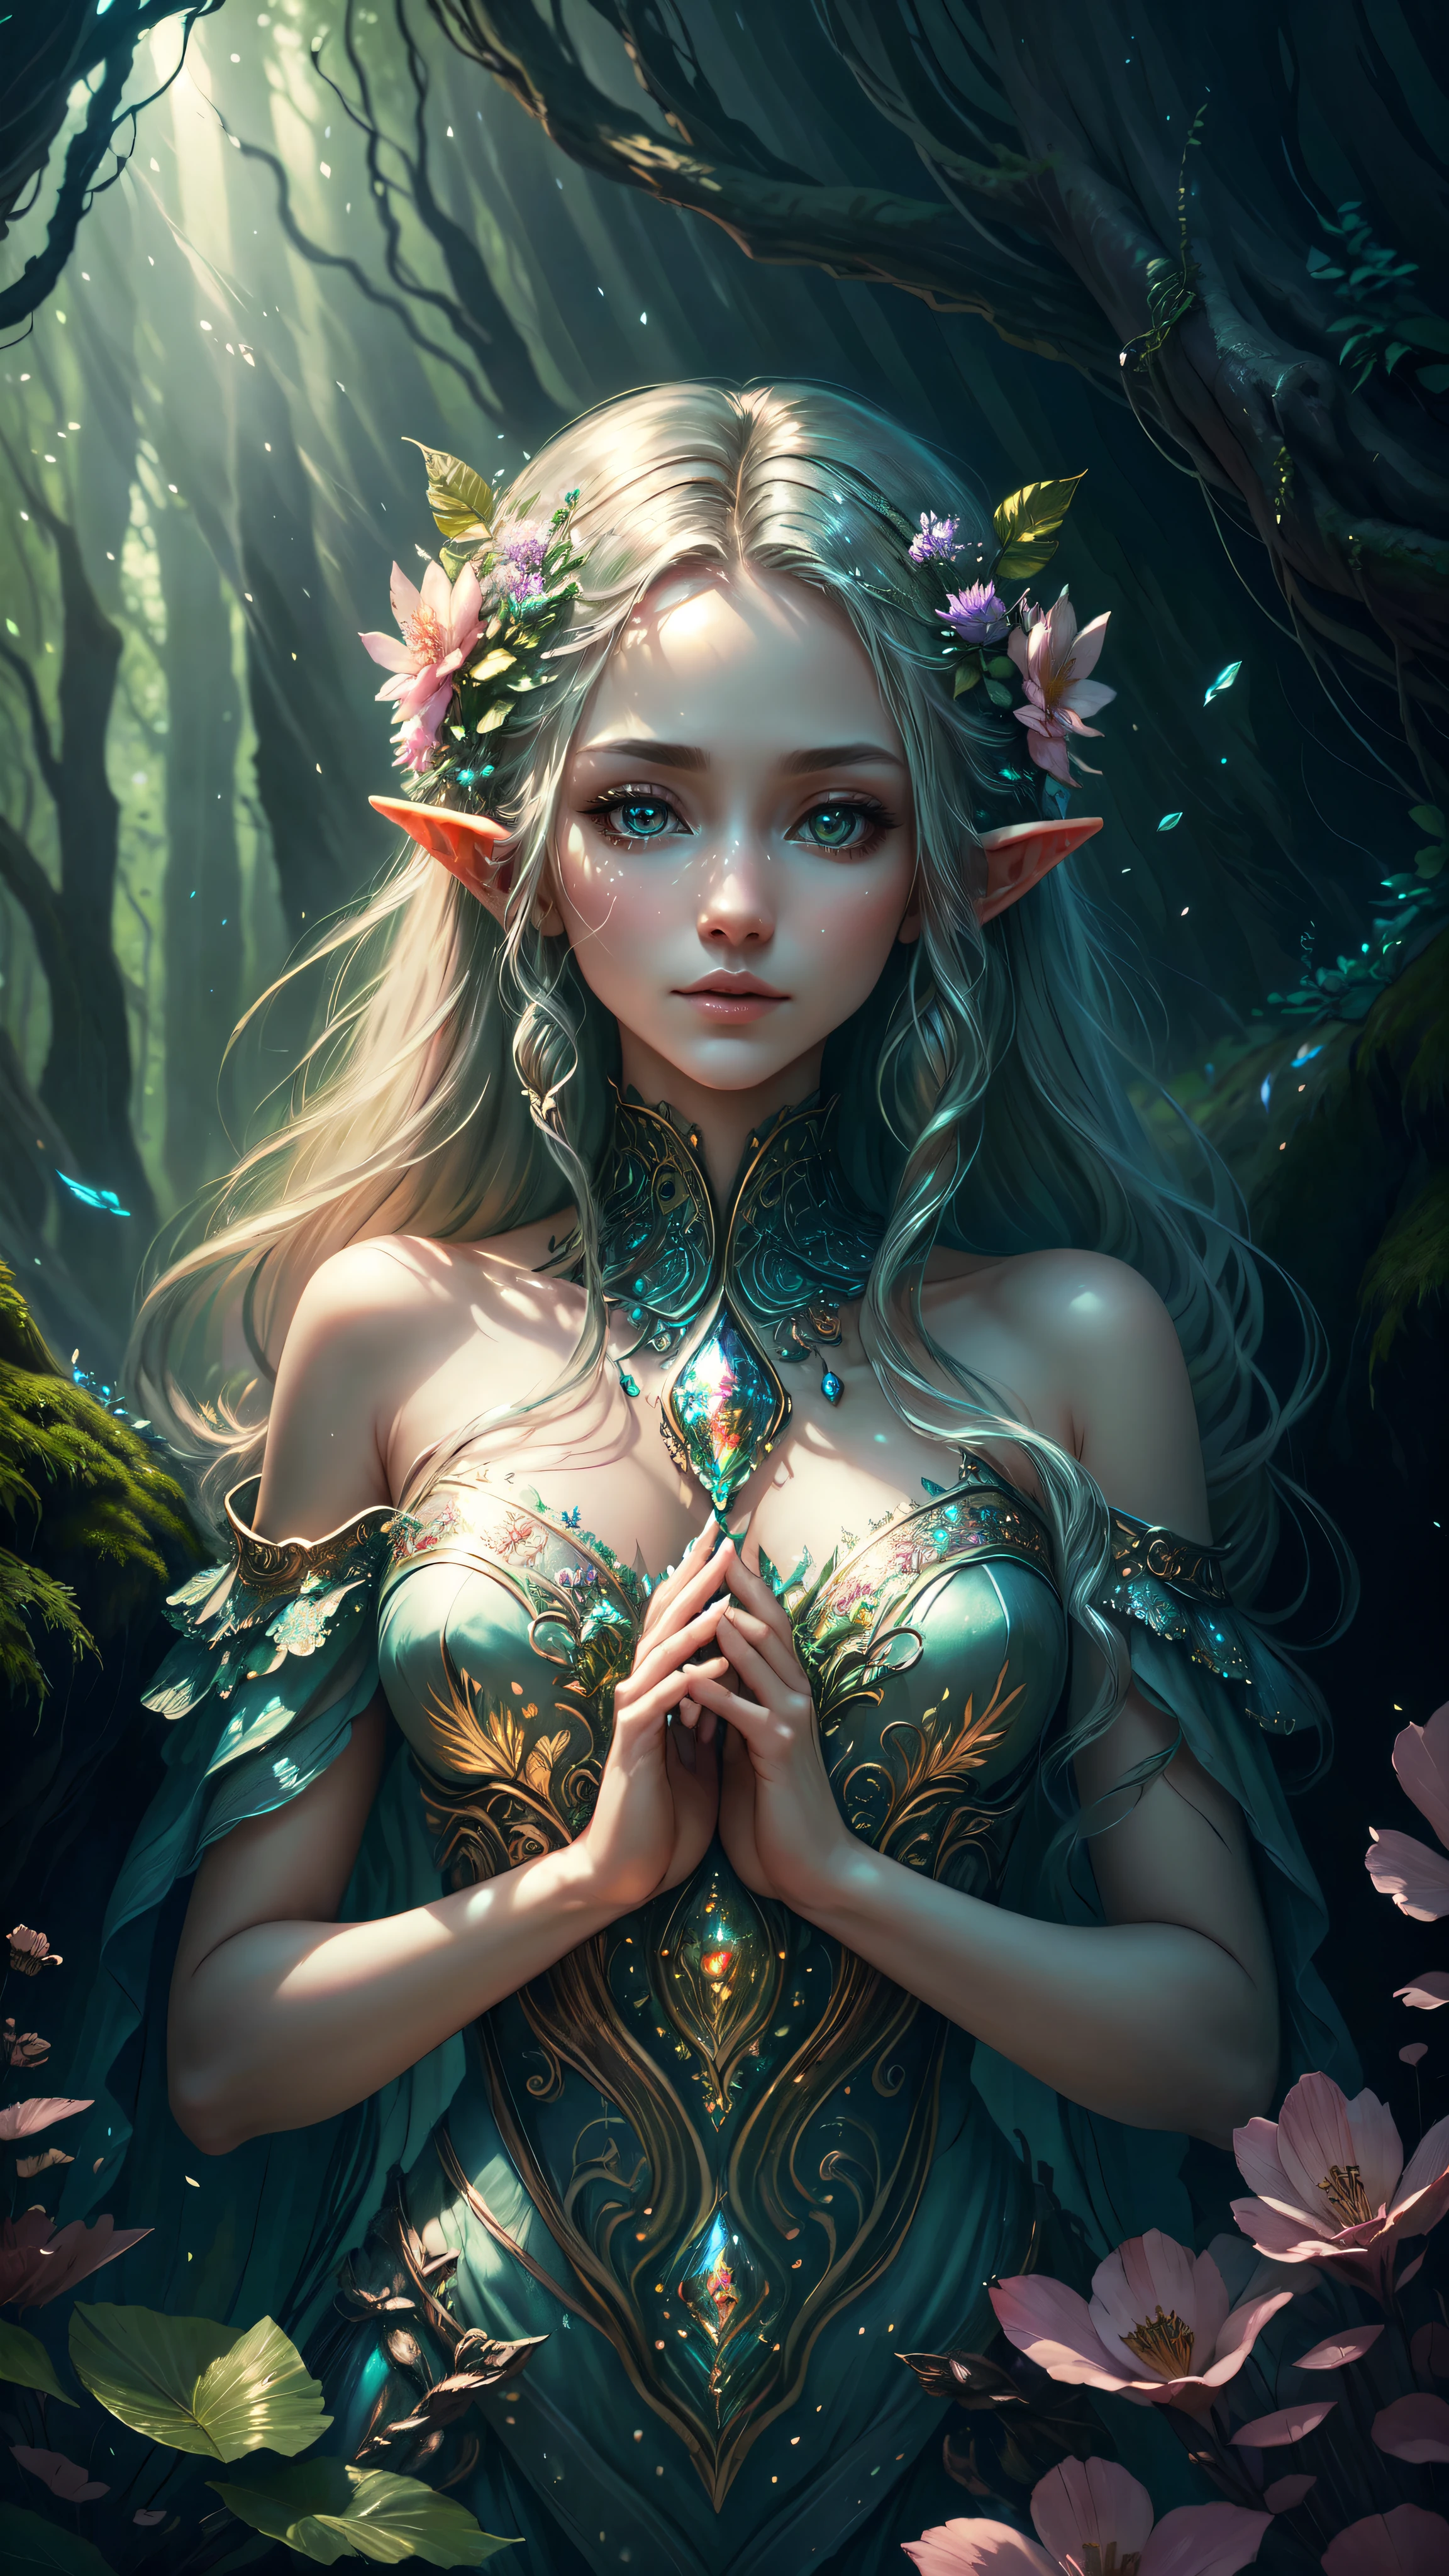 (highres,best quality),detailed elf woman,detailed face,detailed eyes,looking up to the sky,half-naked,neon colors,landscape background,forest  flowers elements,waterfall,ethereal atmosphere,soft sunlight,serene expression,flowing hair,fantasy setting,magical ambiance,glowing flowers,delicate features,enchanted forest,rays of light,pastel hues,mystical creatures,majestic trees,sparkling water,dappled shadows,ethereal beauty,fierce yet elegant,graceful posture,strong connection with nature,mysterious eyes,wisdom and enchantment,harmonious blend of fantasy and reality,mythical realm,magic in the air,serenity and tranquility,immersive experience,whimsical and captivating,unforgettable visual journey,masterpiece artwork, detailed face, detailed eyes, detailed hands